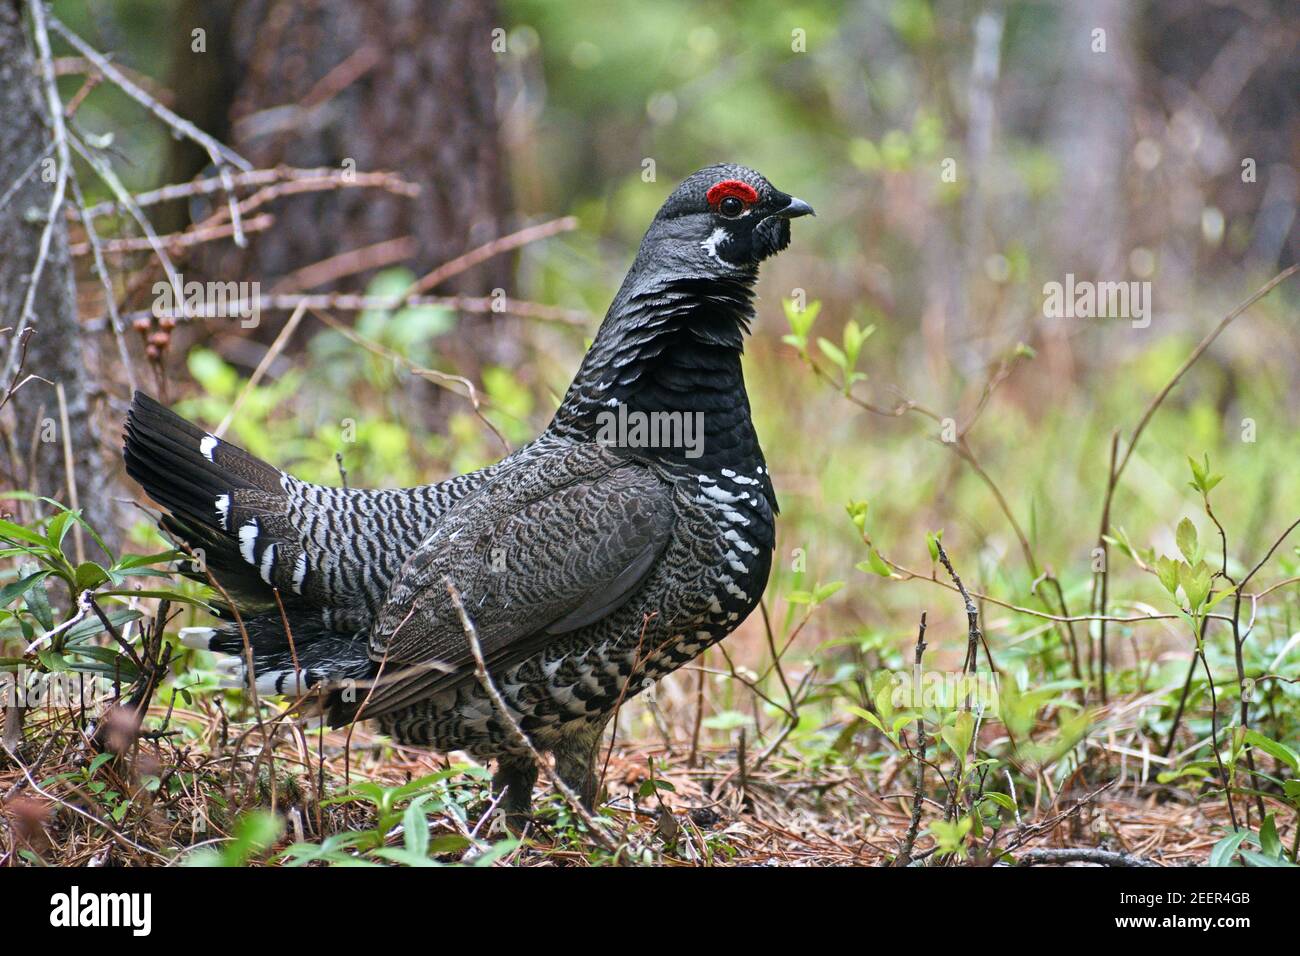 Male spruce grouse in spring mating season. Kootenai National Forest in the Purcell Mountains, northwest Montana. (Photo by Randy Beacham) Stock Photo